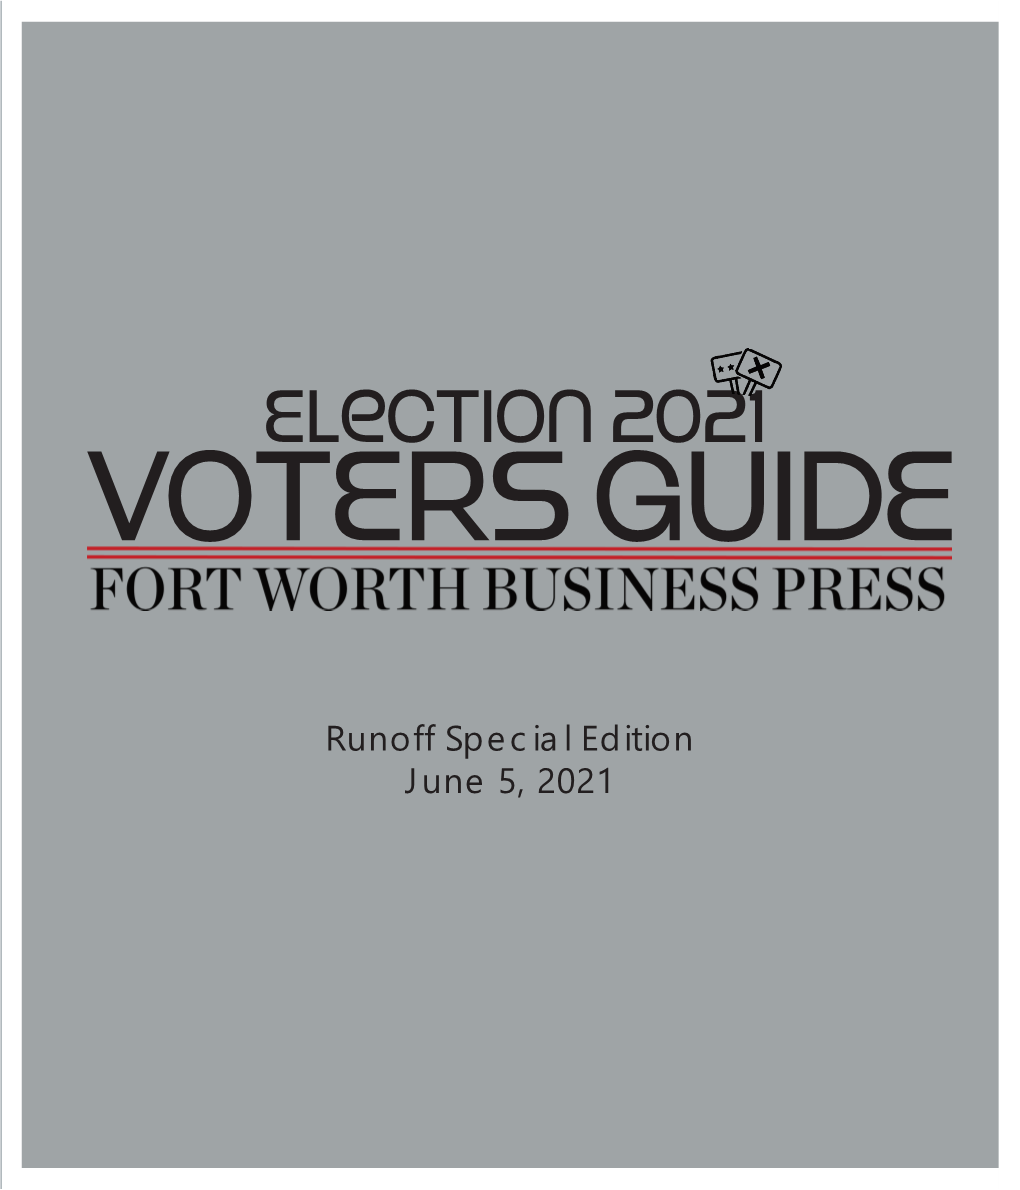 Runoff Special Edition June 5, 2021 Welcome to the Fort Worth Business Press Voters’ Guide